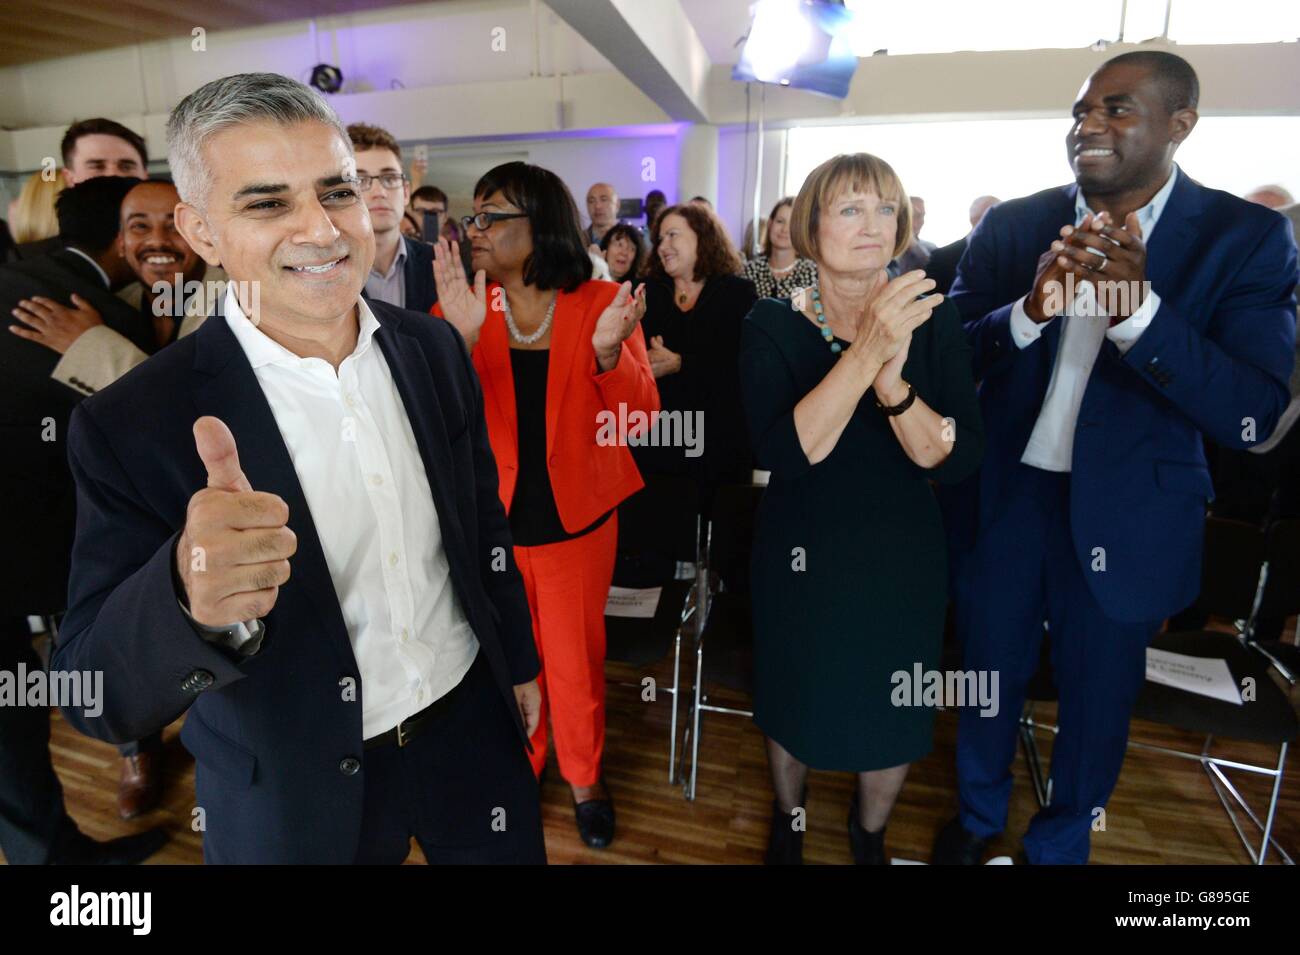 Sadiq Khan MP is congratulated by (left to right) Diane Abbott, Tessa Jowell and David Lammy after it was announced that he has been chosen as the Labour candidate to run for London mayor in 2016. Stock Photo